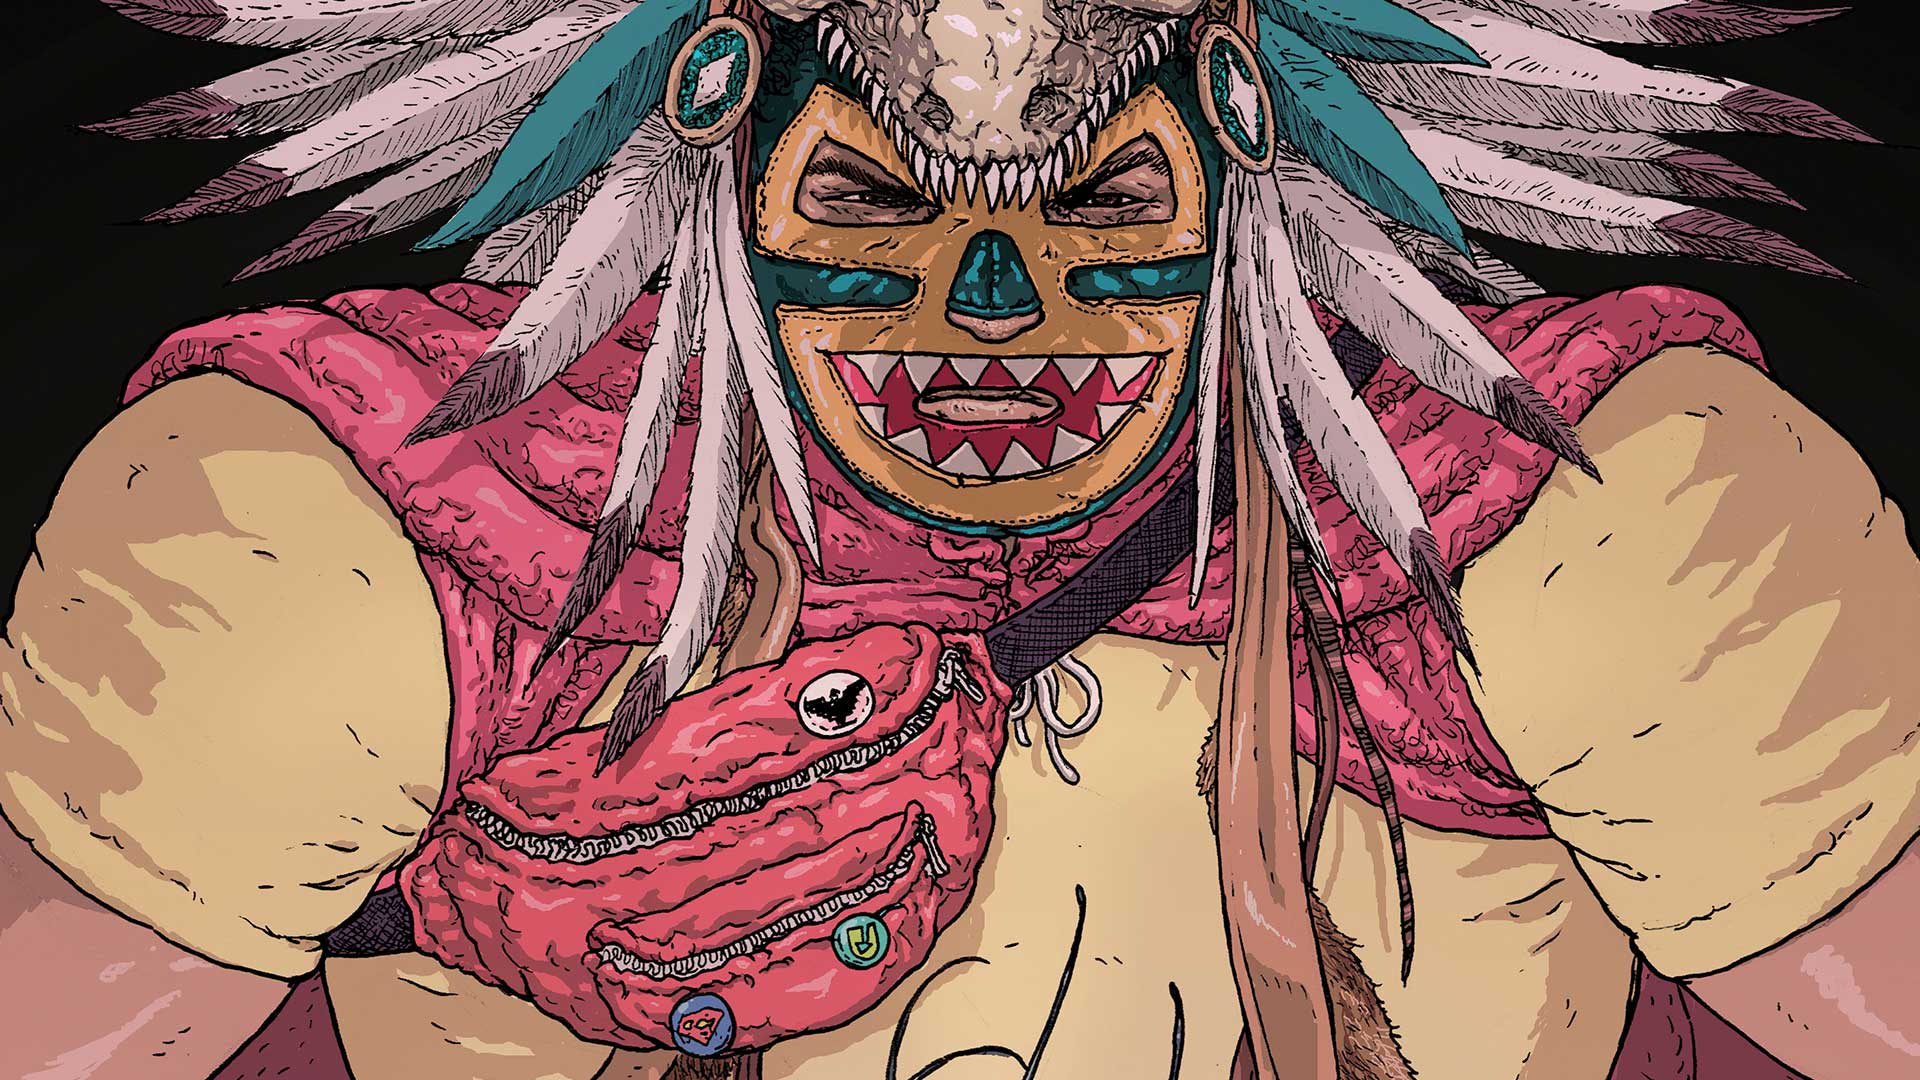 Border Town #2 review: Deftly using action and monsters to tackle immigration